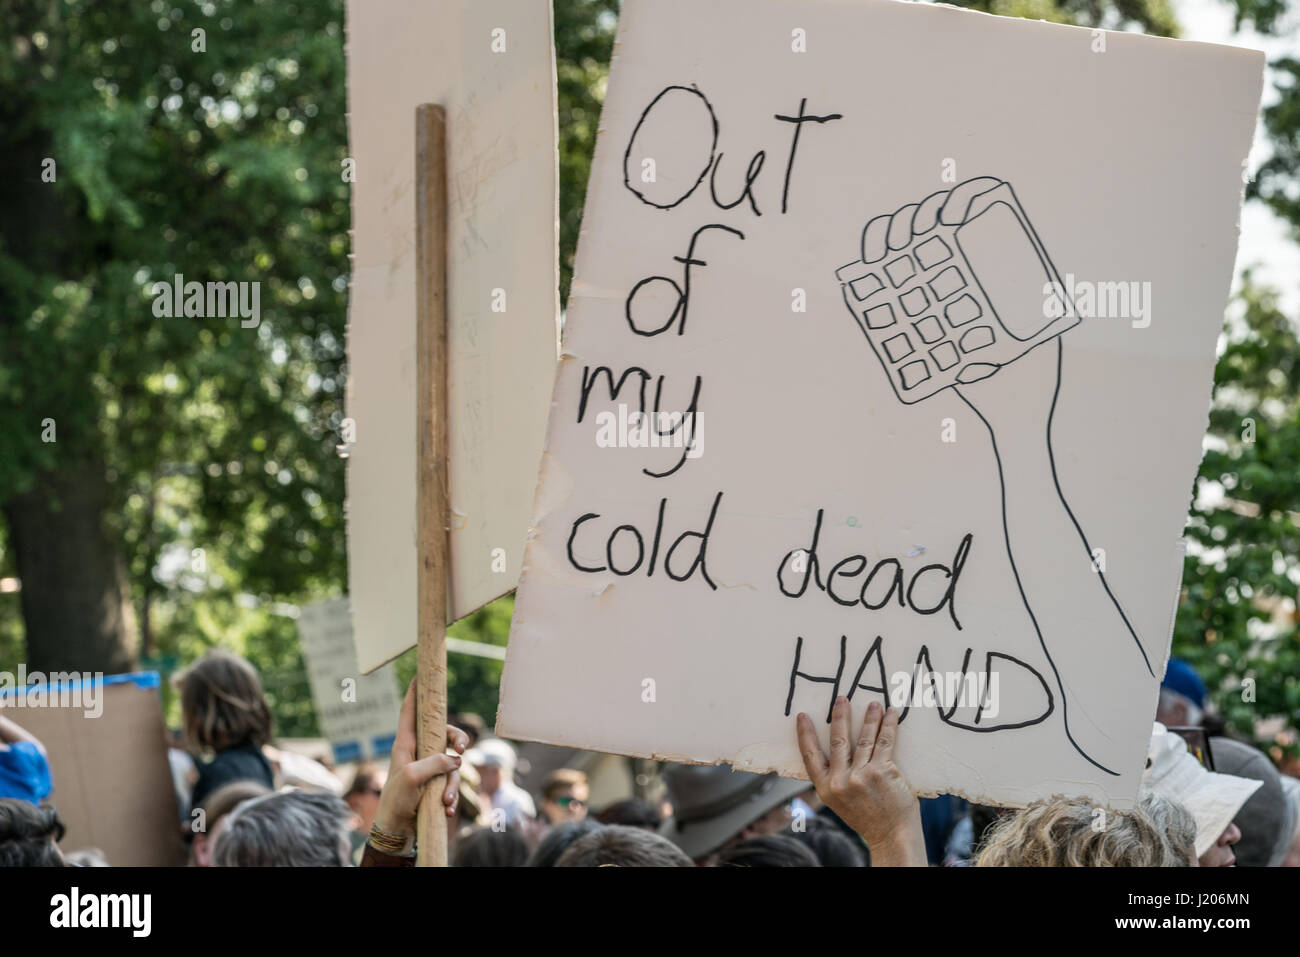 Protesters hold signs high at the Raleigh March for Science held on April 22, 2017. Stock Photo